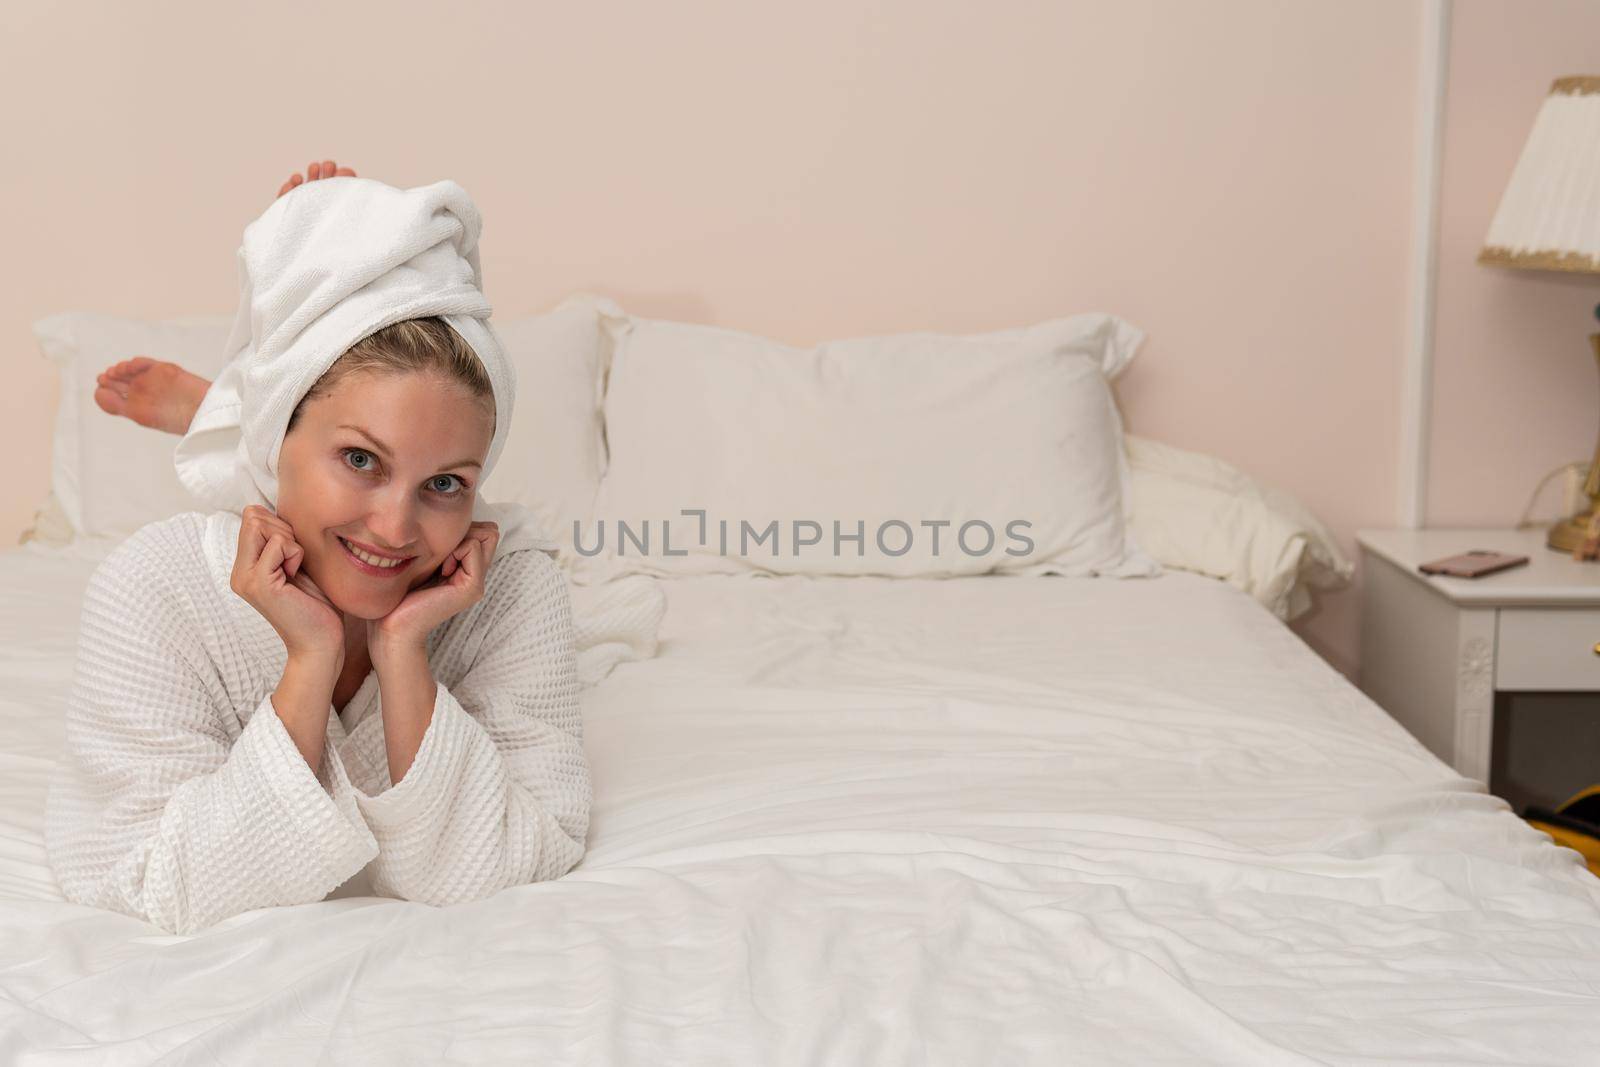 Bed female beauty bathrobe copyspace spa care body lady white, concept preparing woman in relax and treatment girl, gown concept. Interior people american,